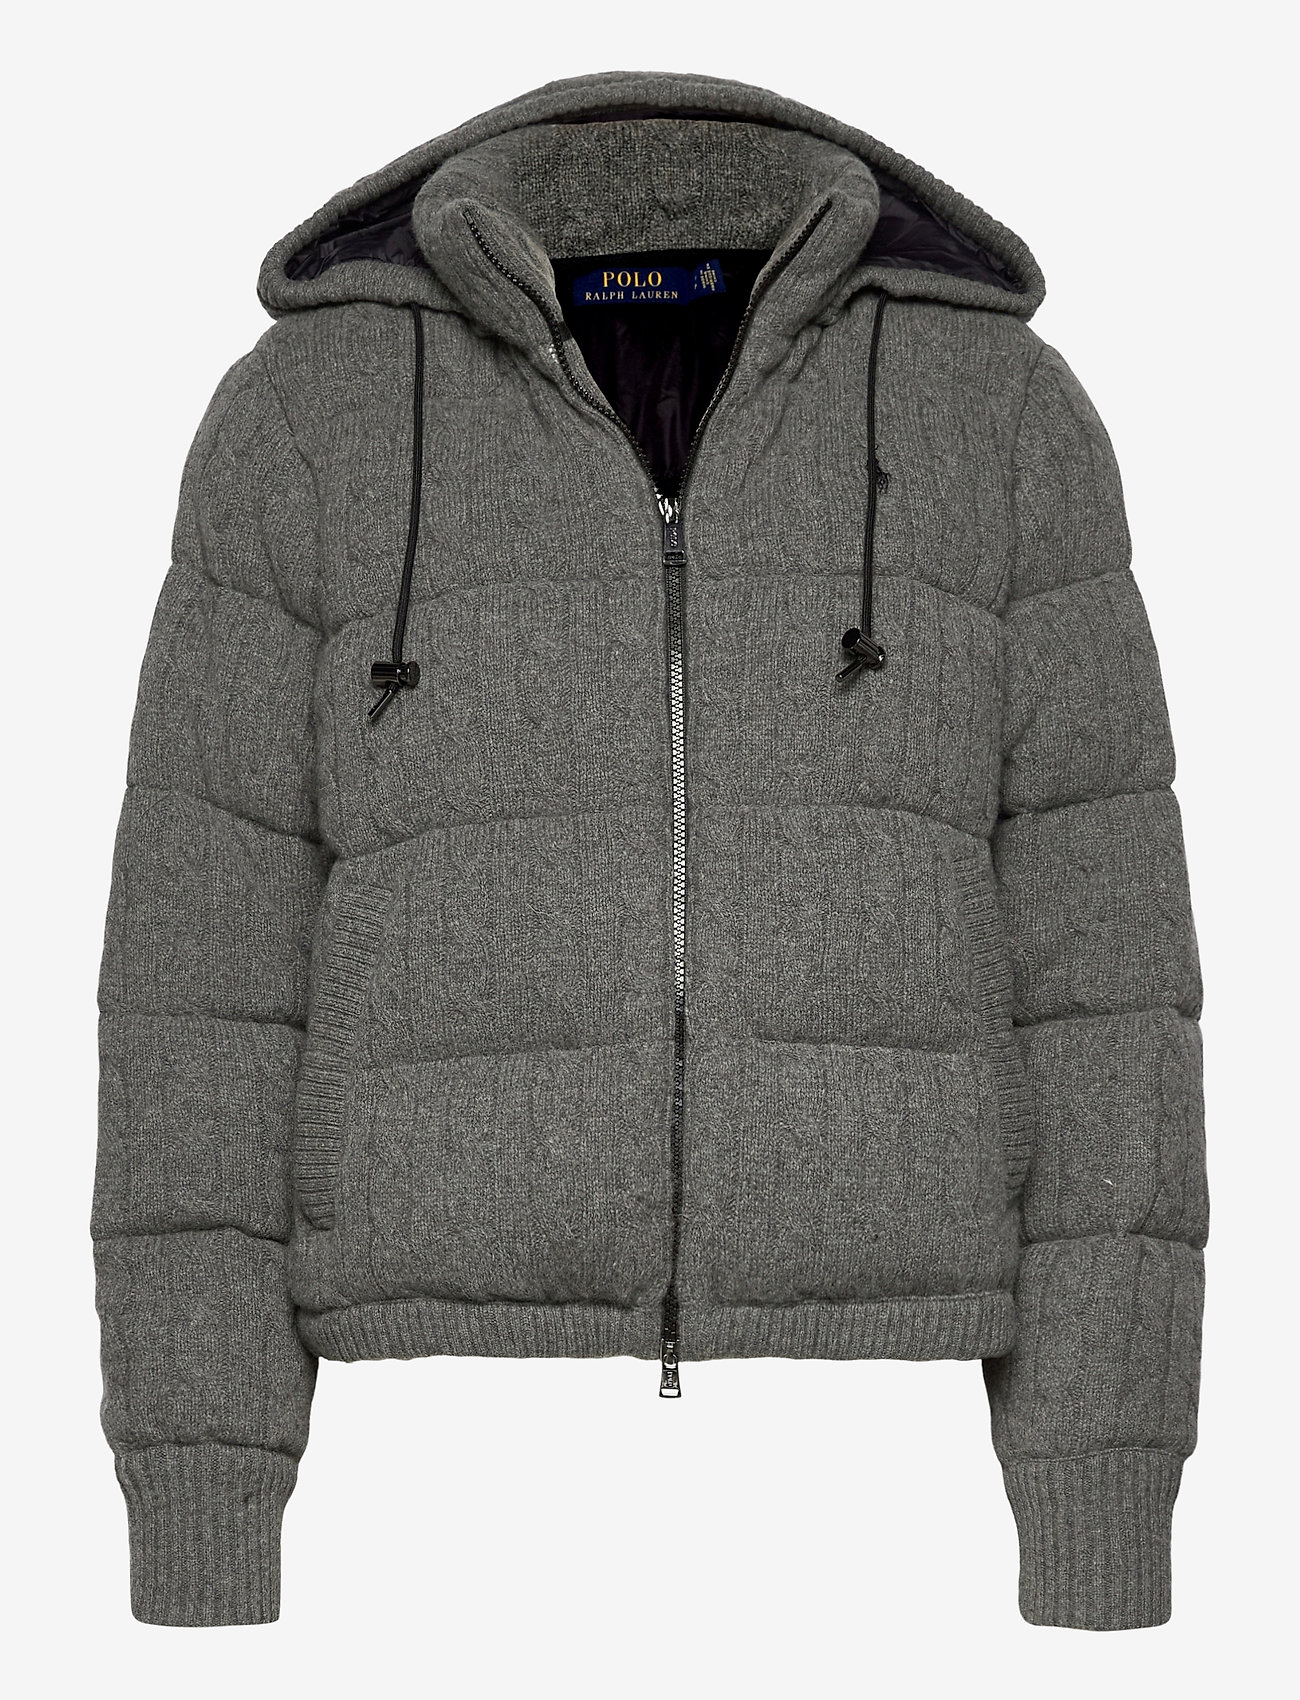 polo down filled jacket